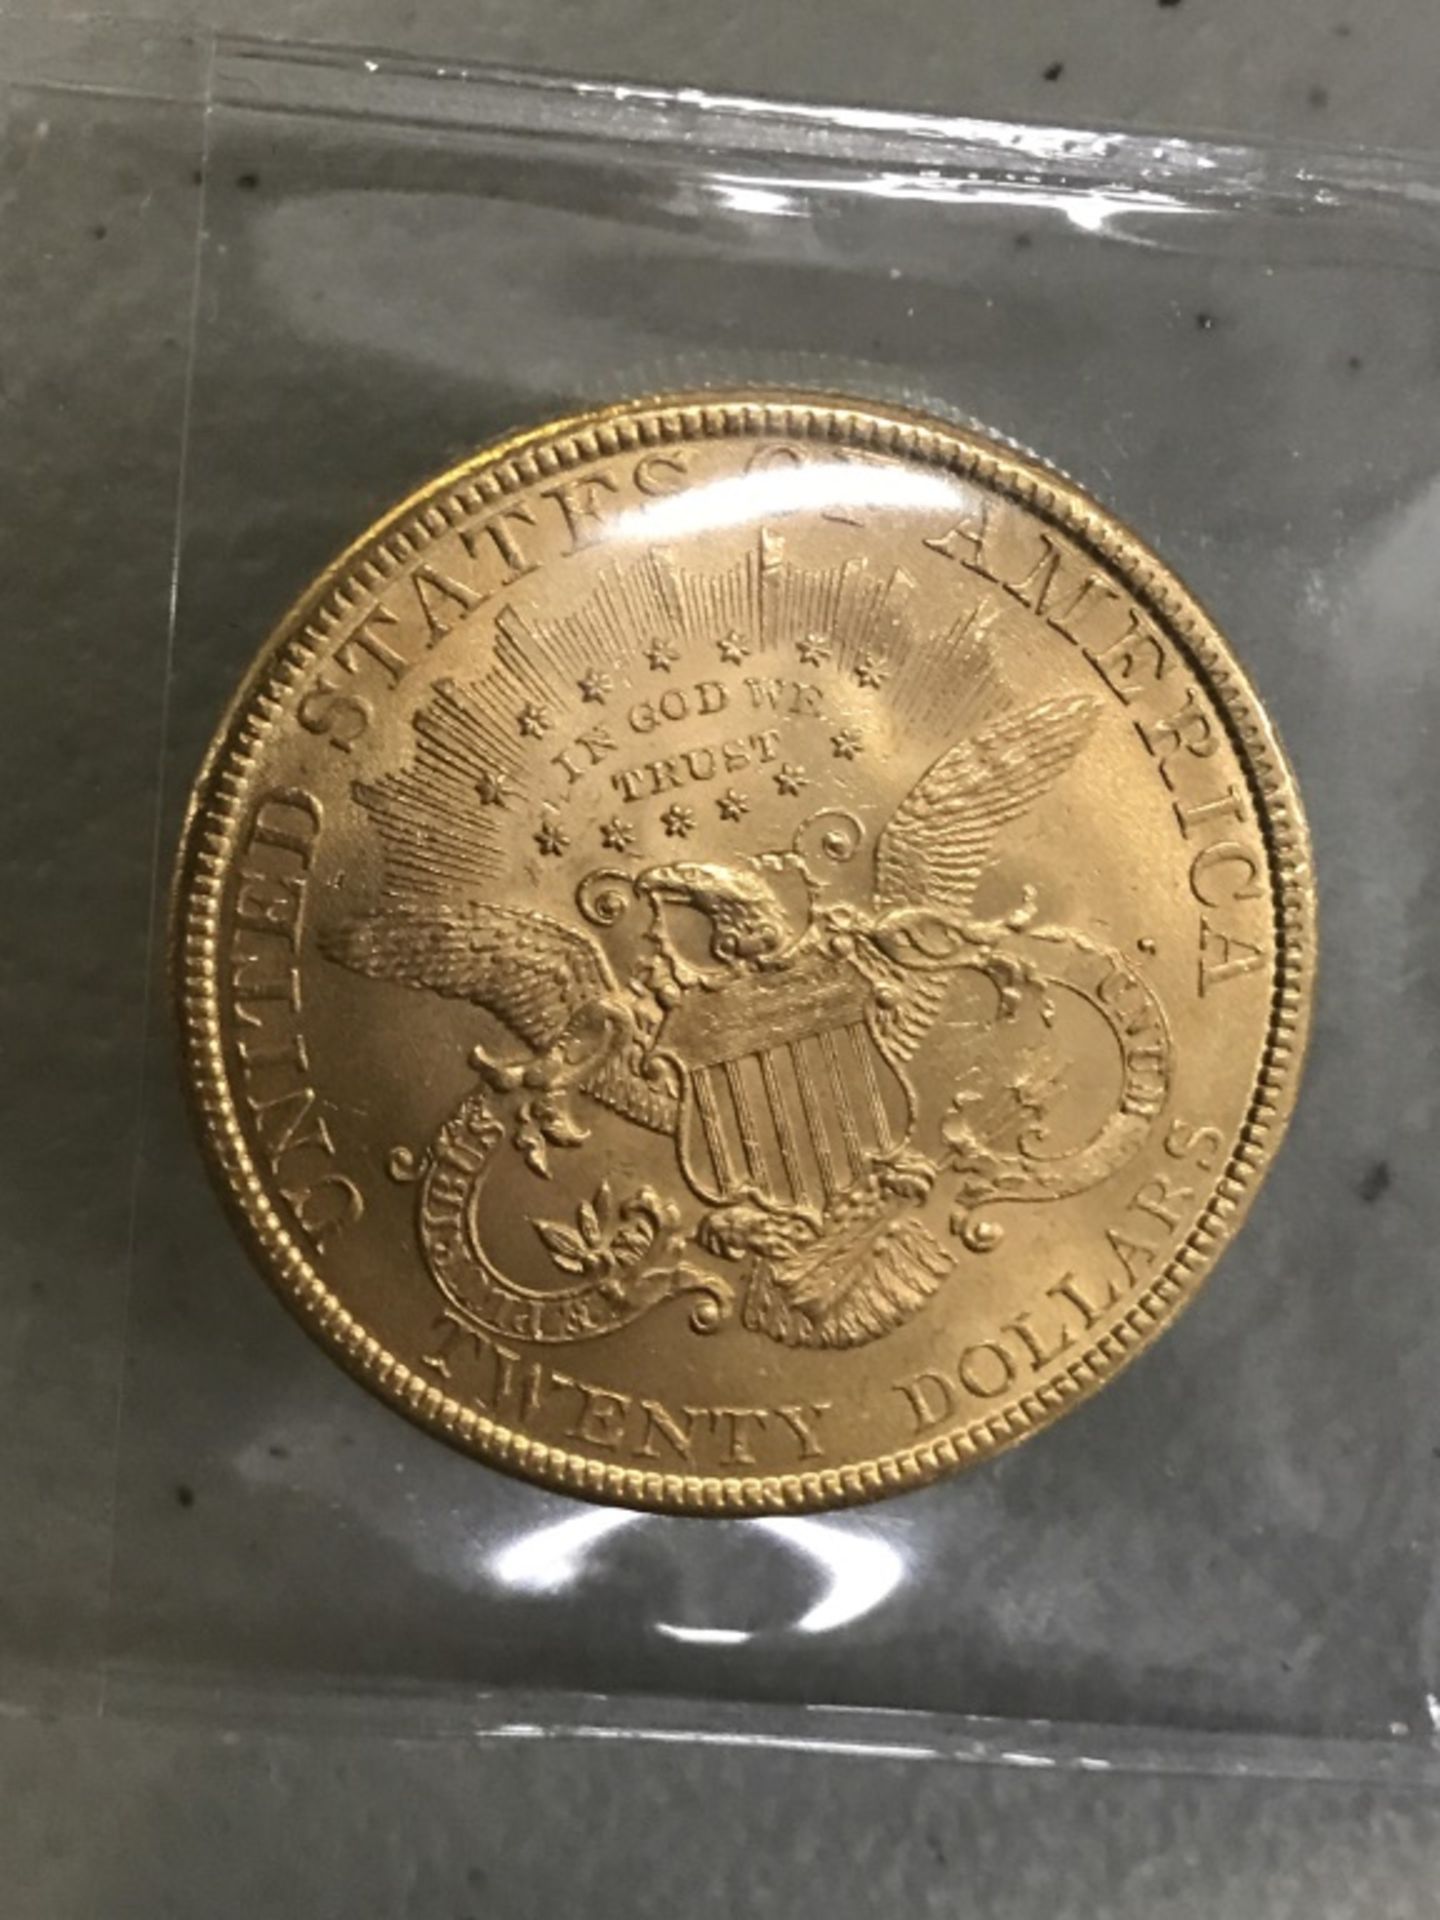 $20 US Gold 1895 Coin - Image 9 of 9